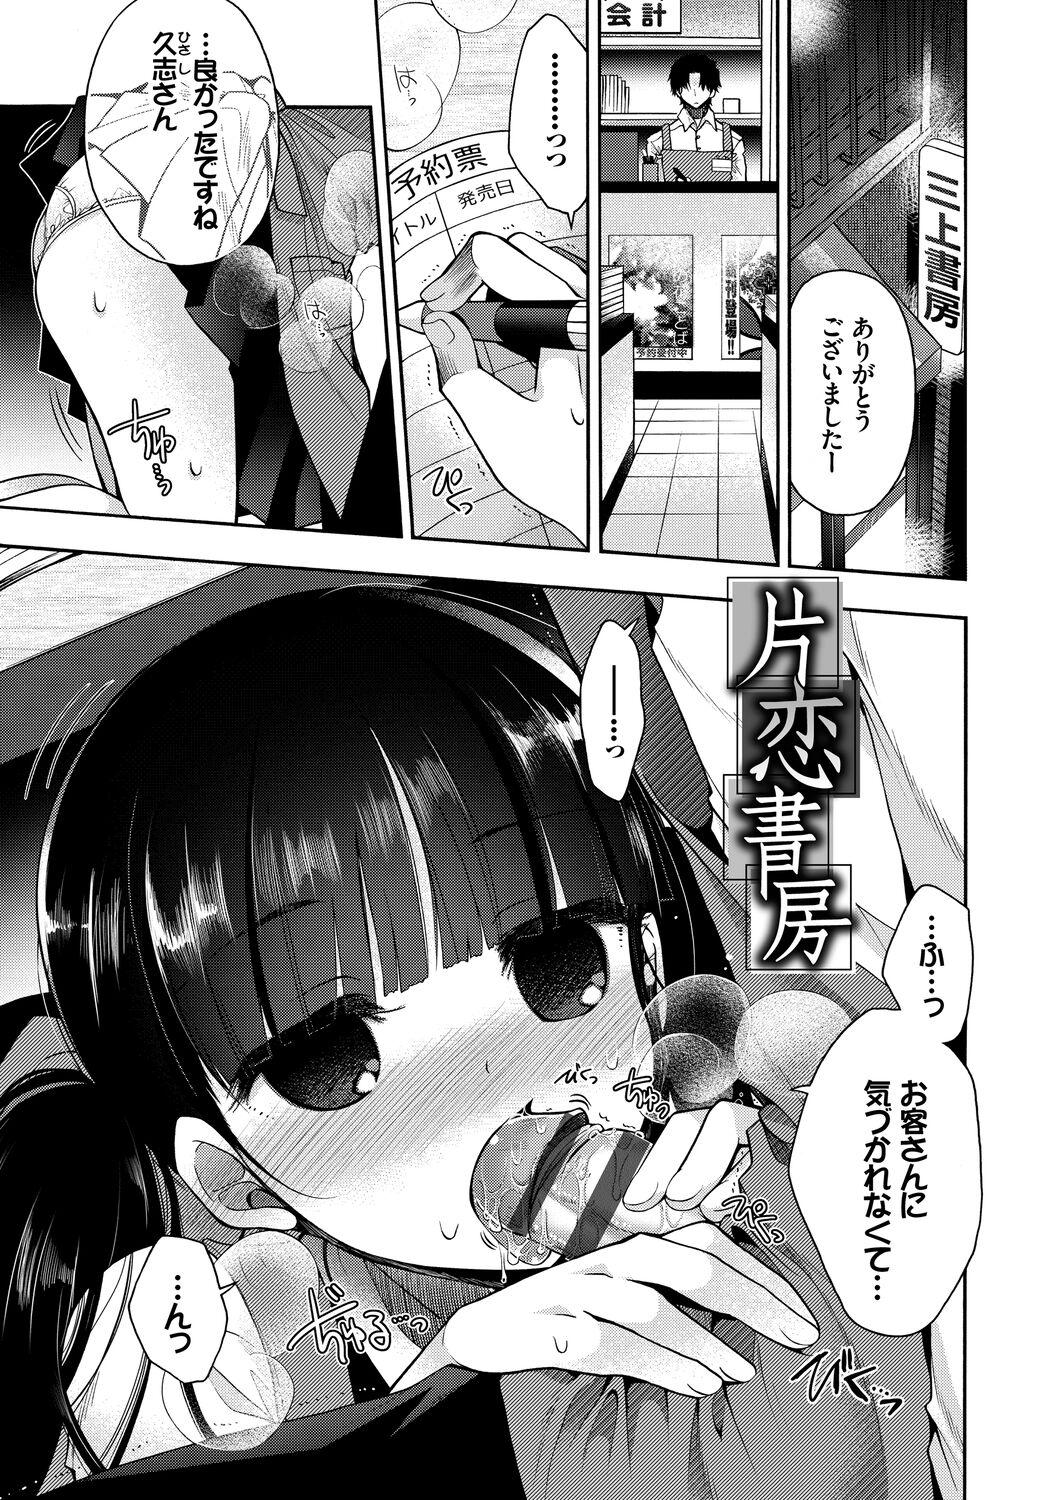 Hatsukoi Melty - Melty First Love 92